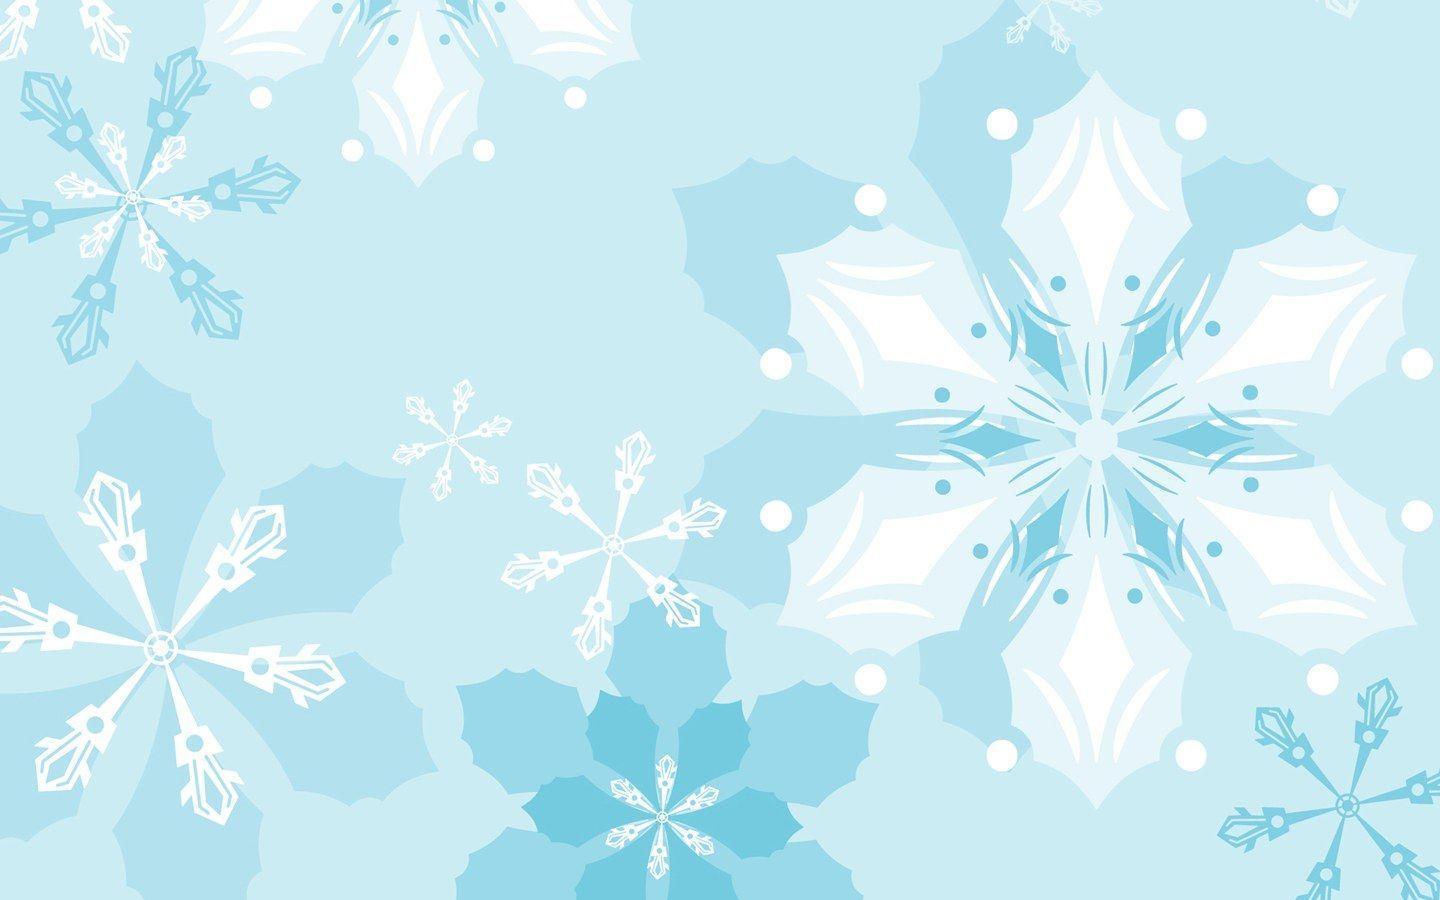 Abstract Winter background snowflakes patterns, Vector